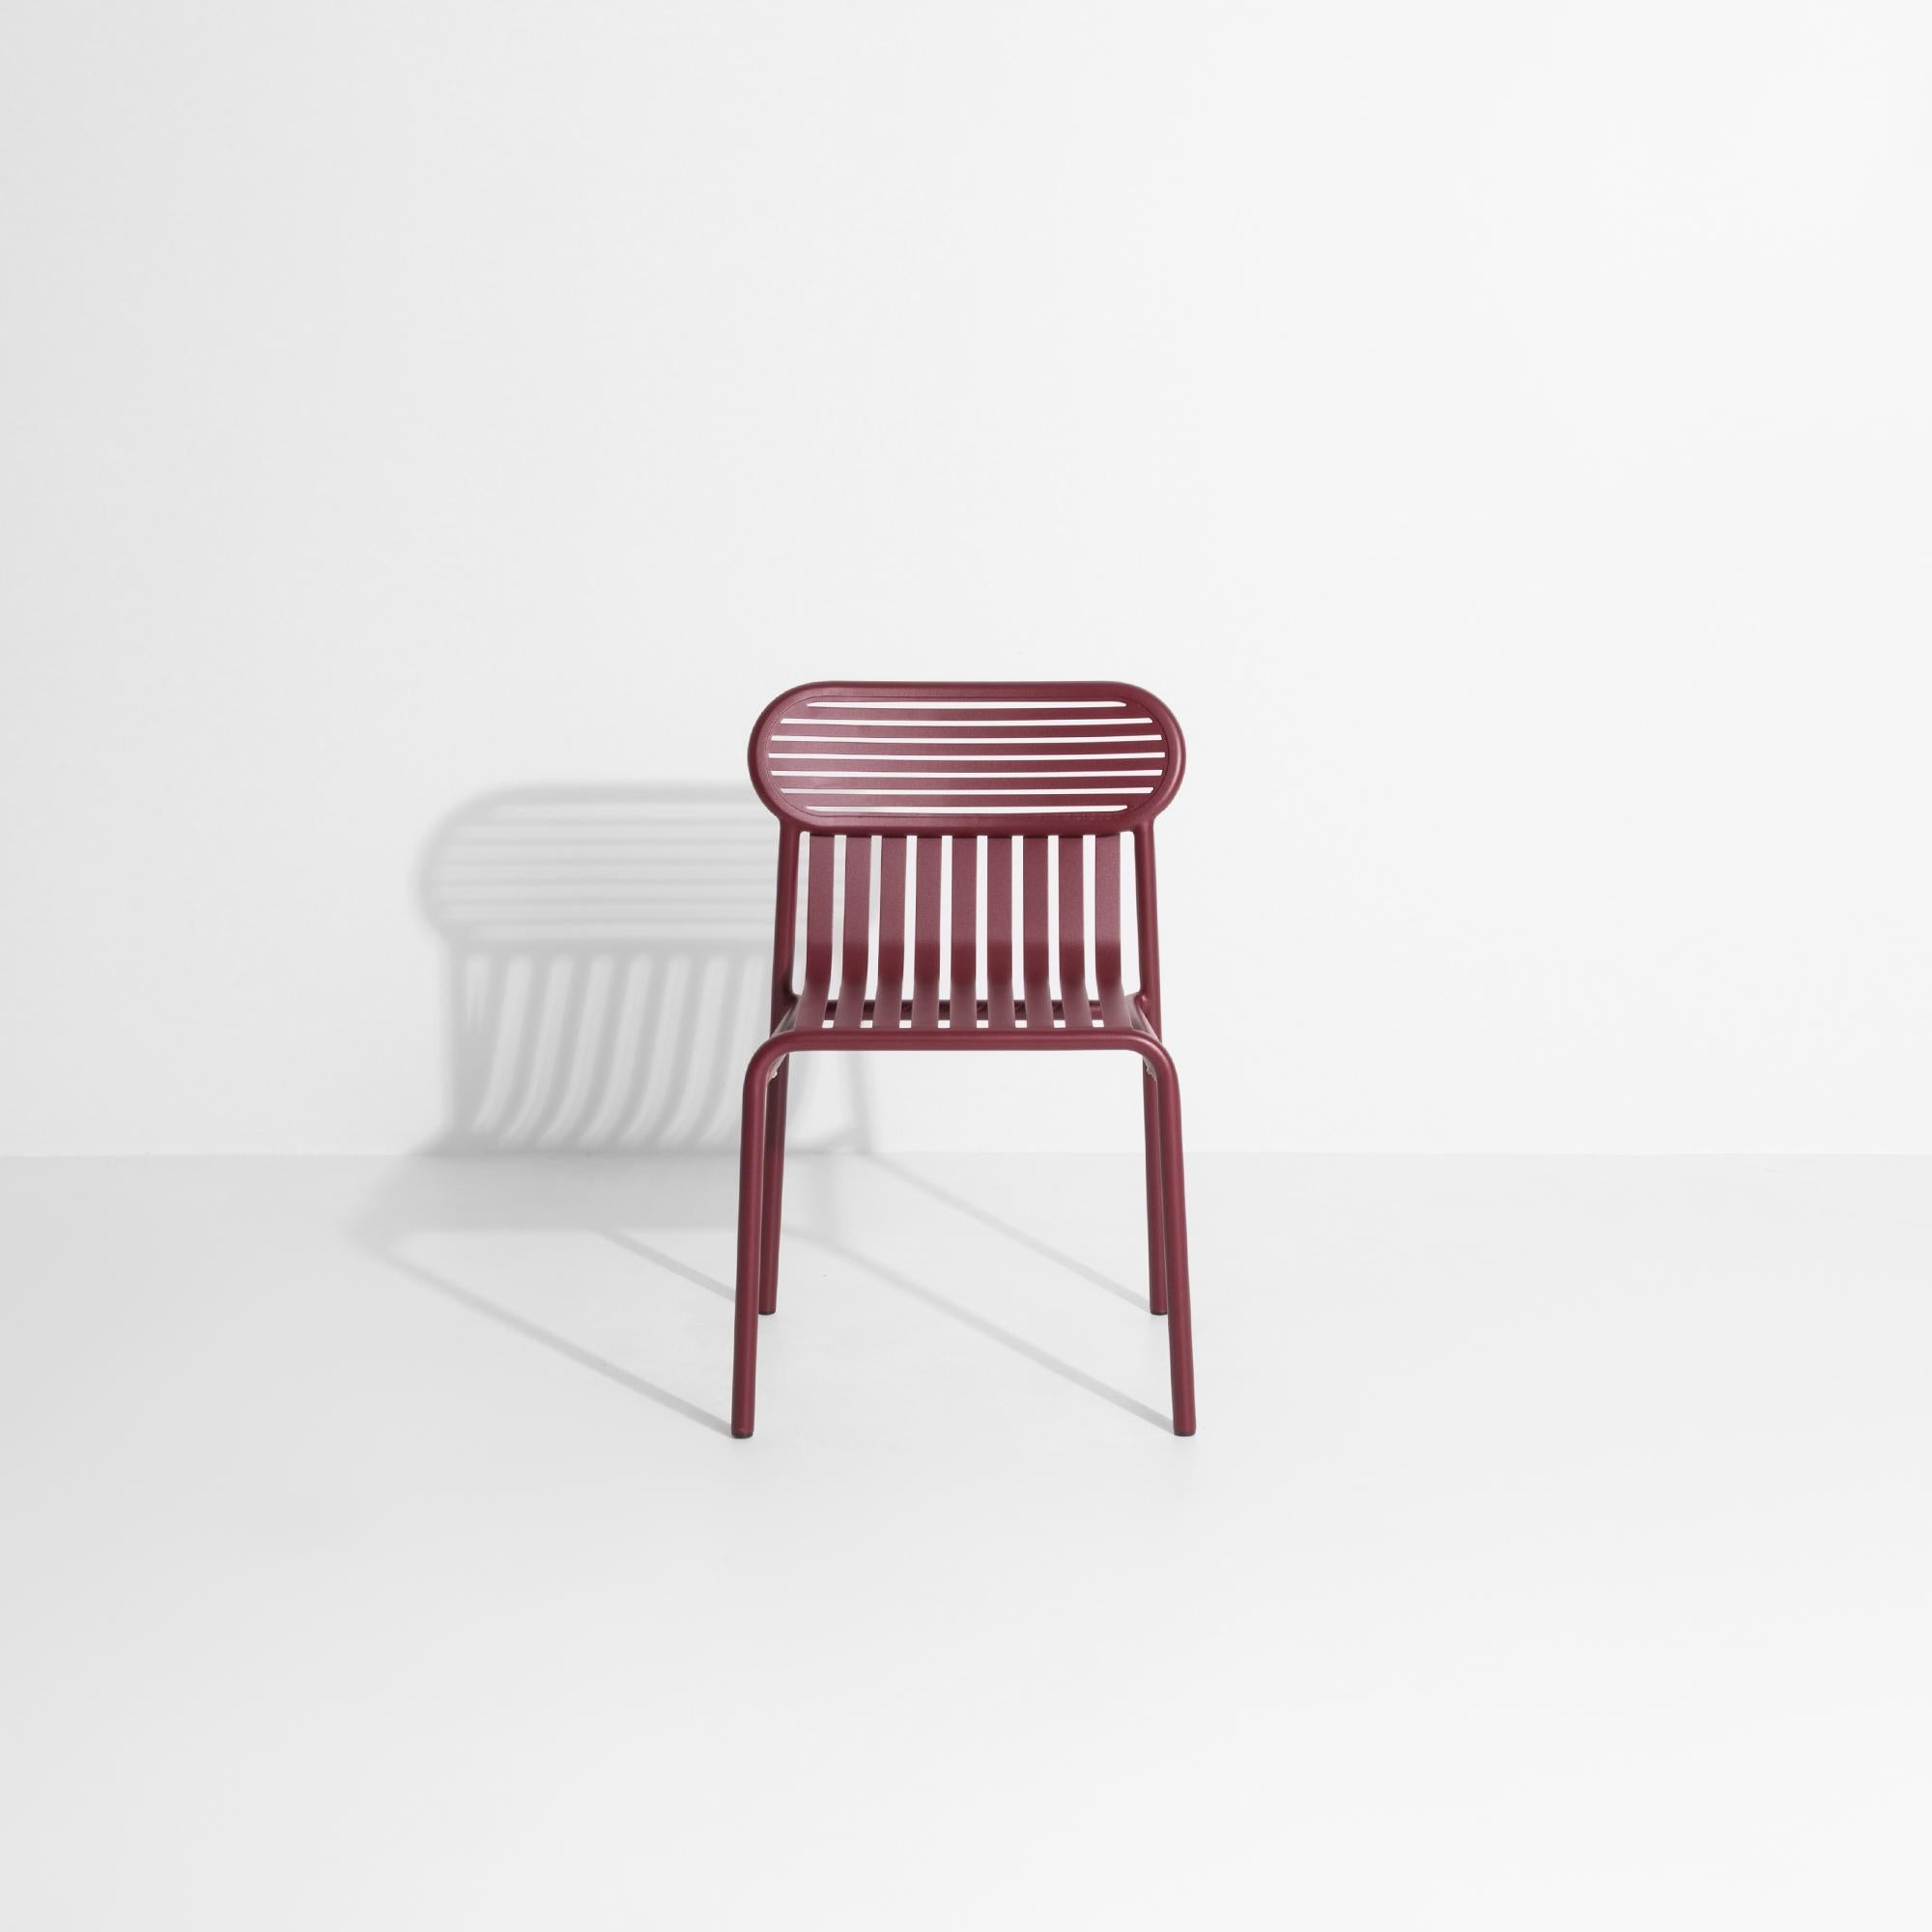 Petite Friture Week-End Chair in Burgundy Aluminium by Studio BrichetZiegler In New Condition For Sale In Brooklyn, NY